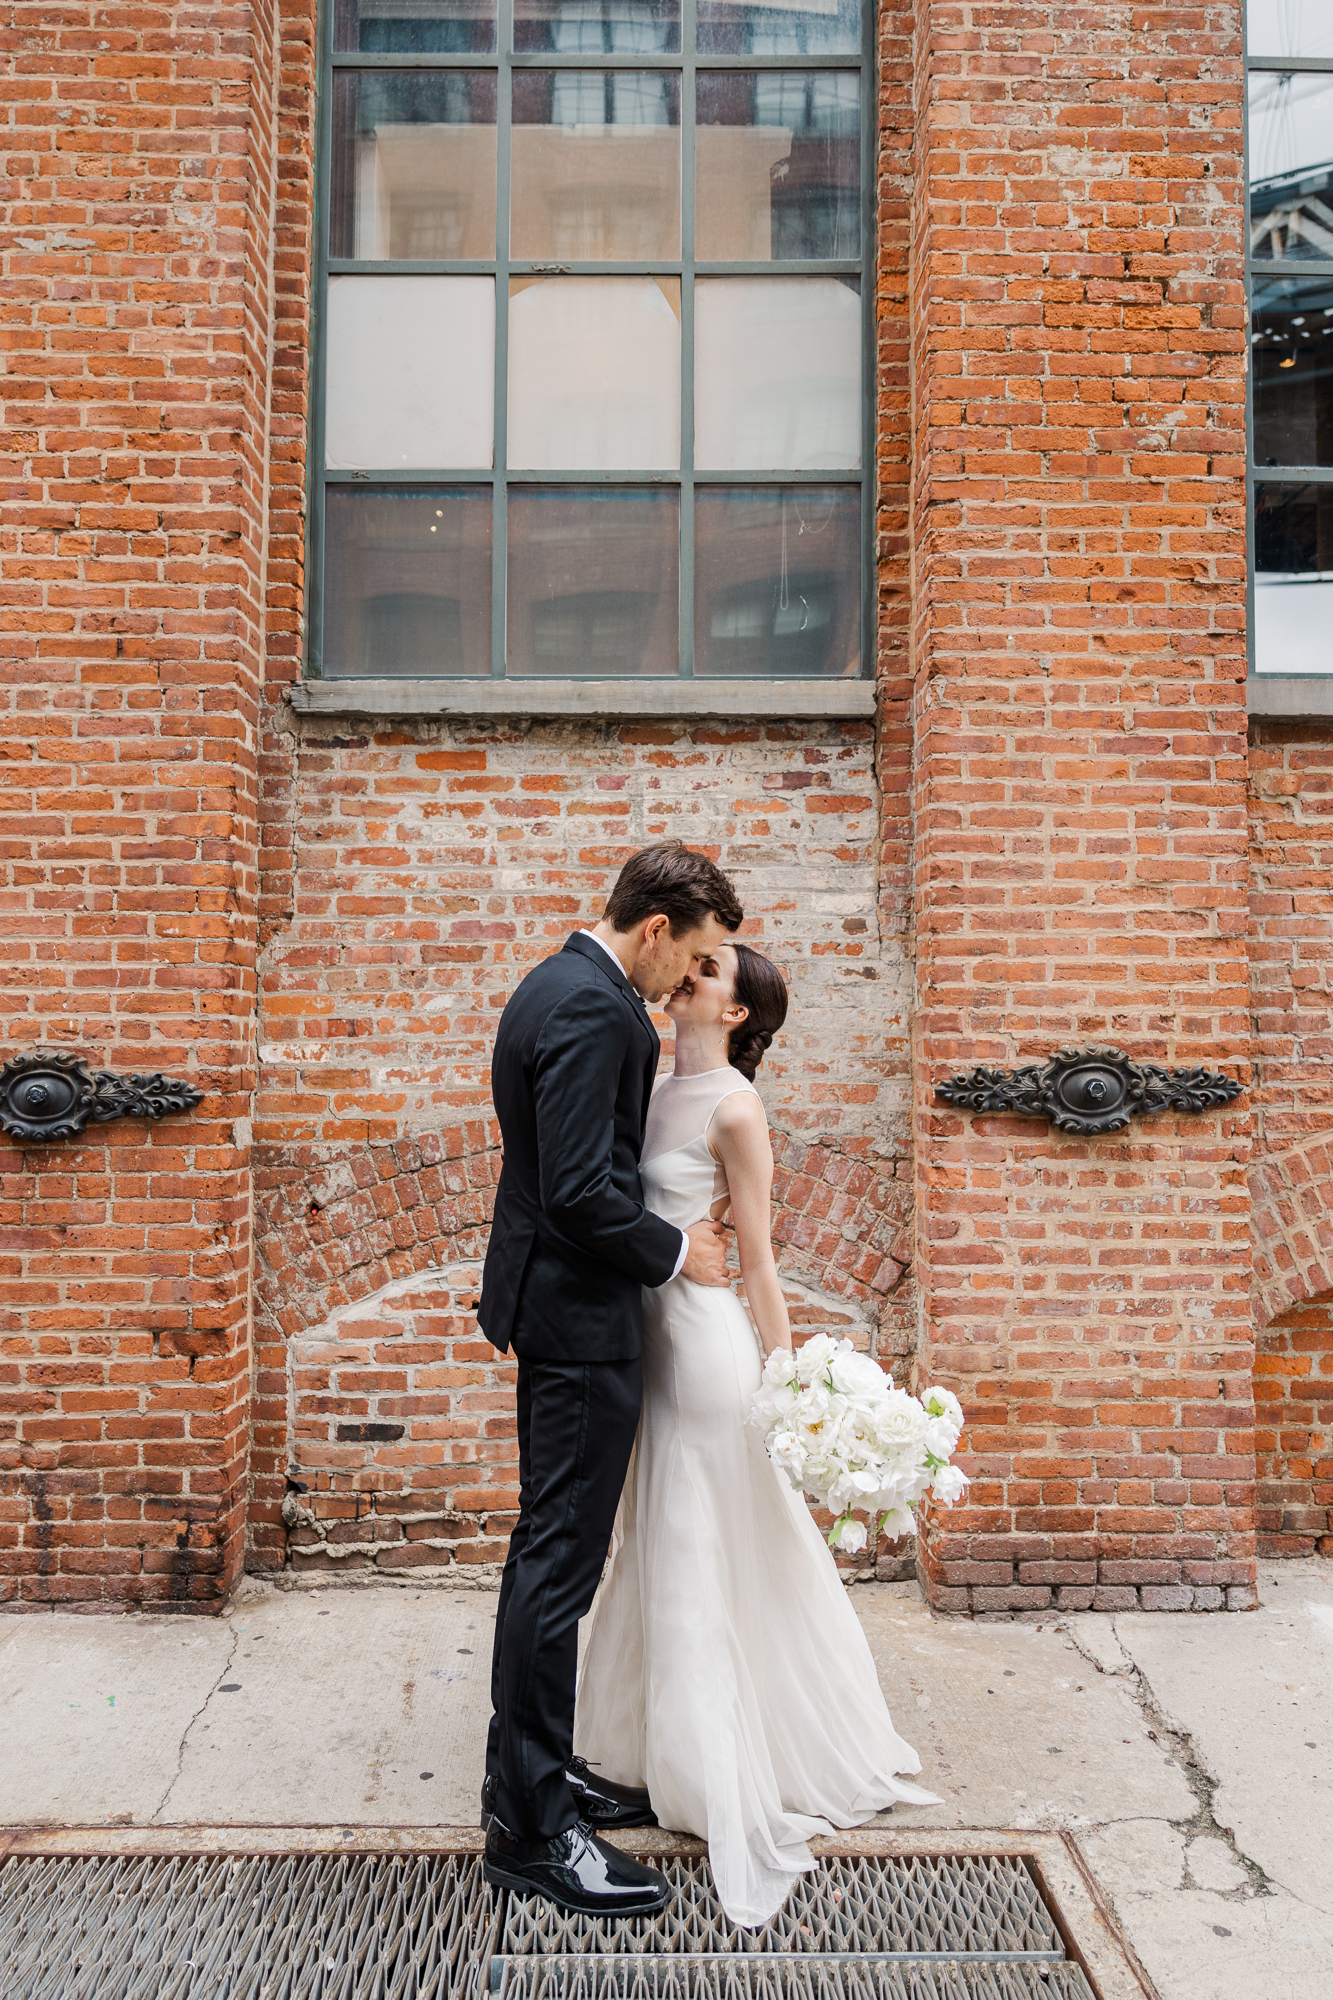 Intimate DUMBO, Brooklyn Wedding Photos at Smack Mellon and Jane's Carousel